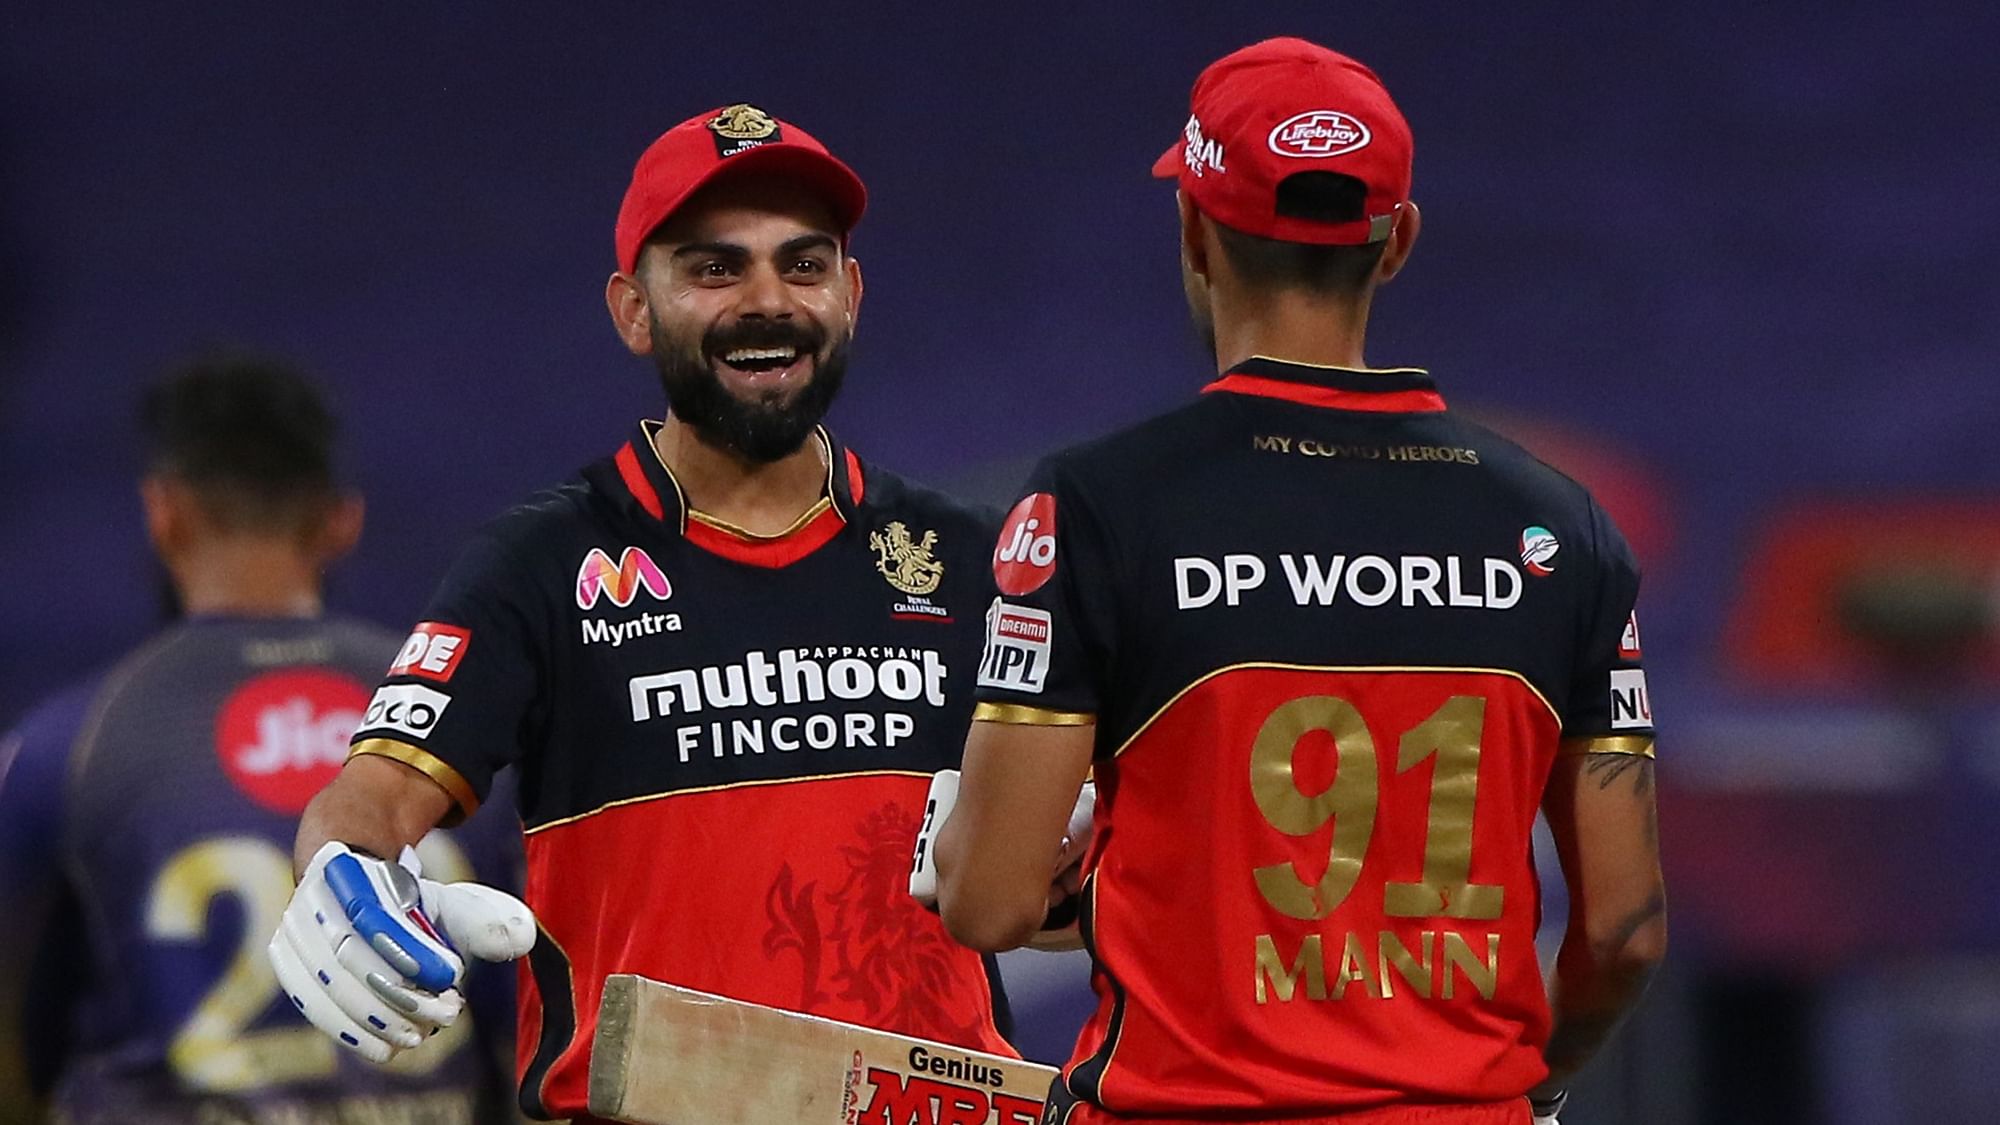 Royal Challengers Bangalore cruised to a win over Kolkata Knight Riders on Wednesday, 21 October.